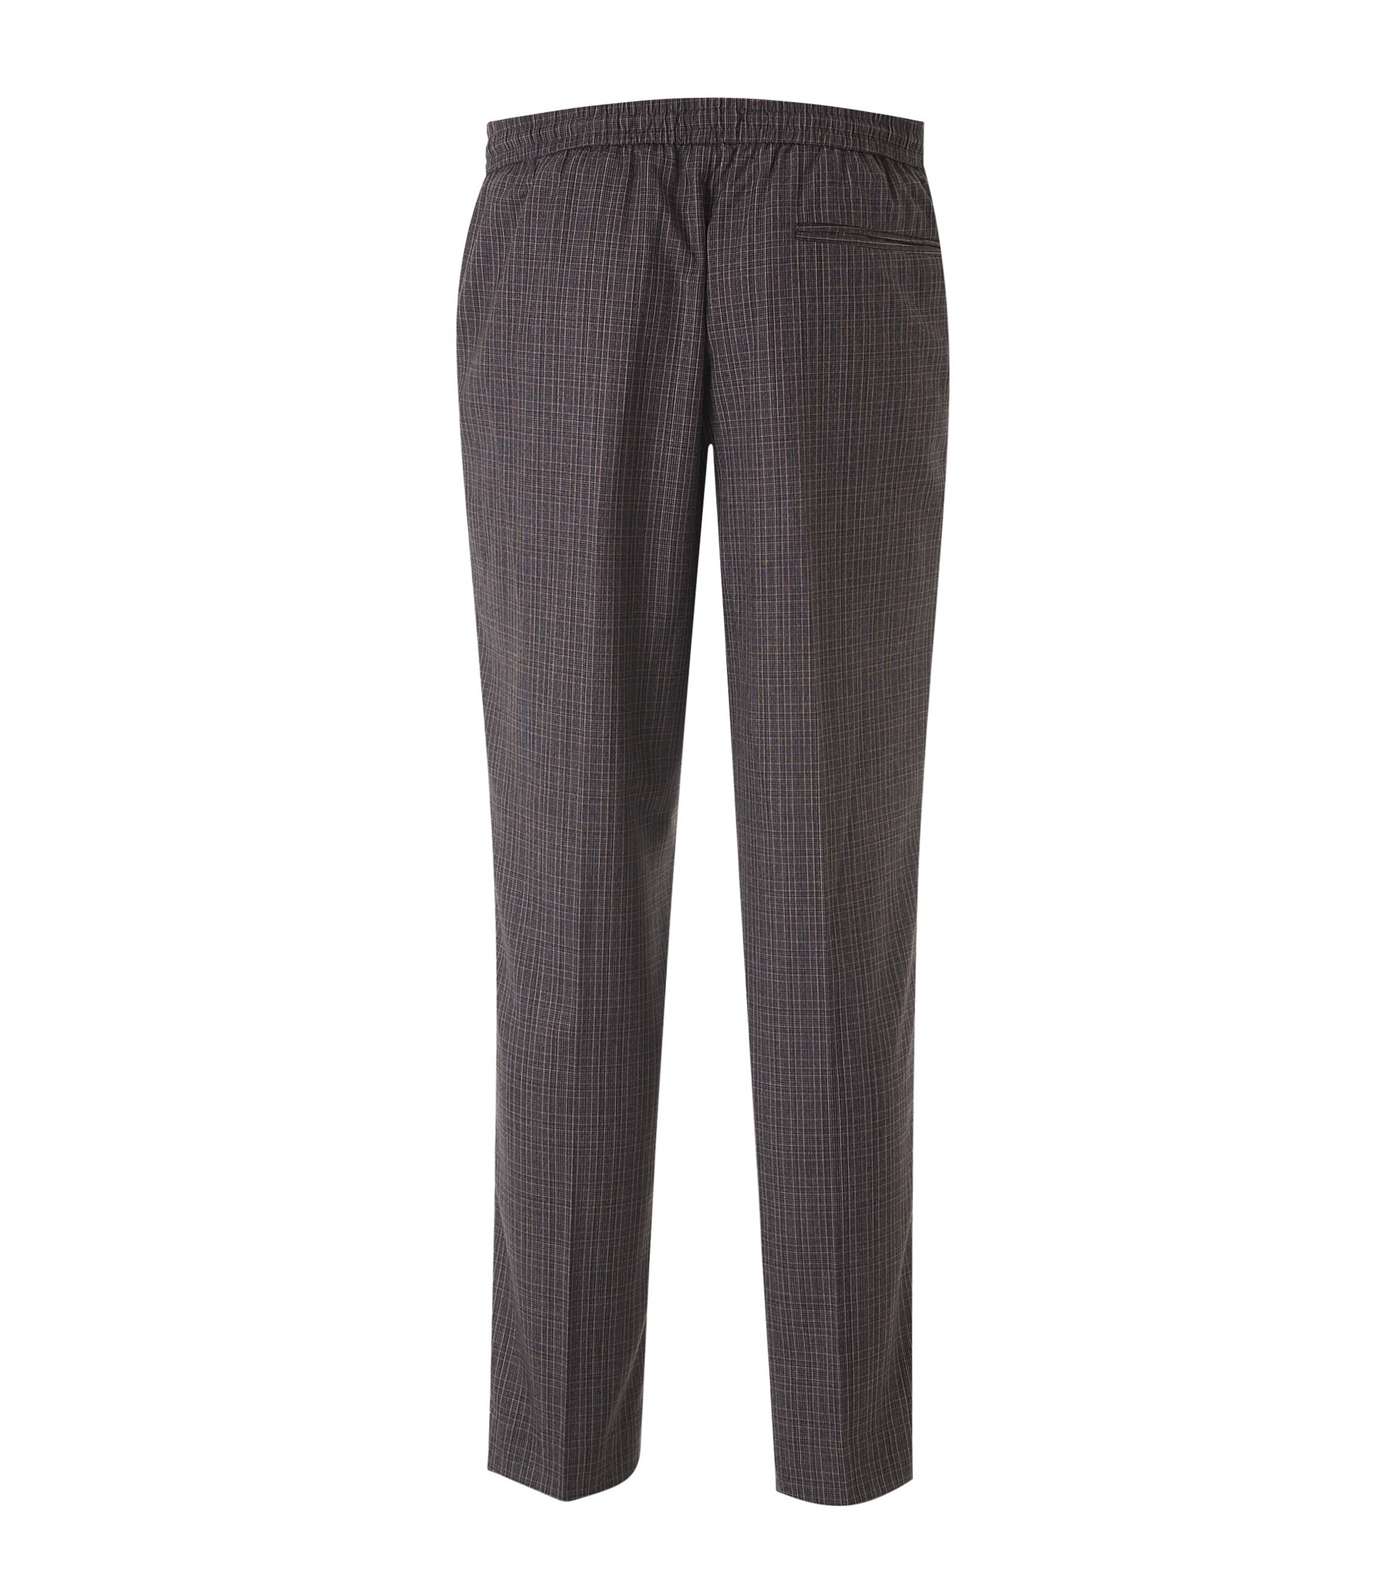 Plus Size Dark Grey Check Pull On Trousers Image 2